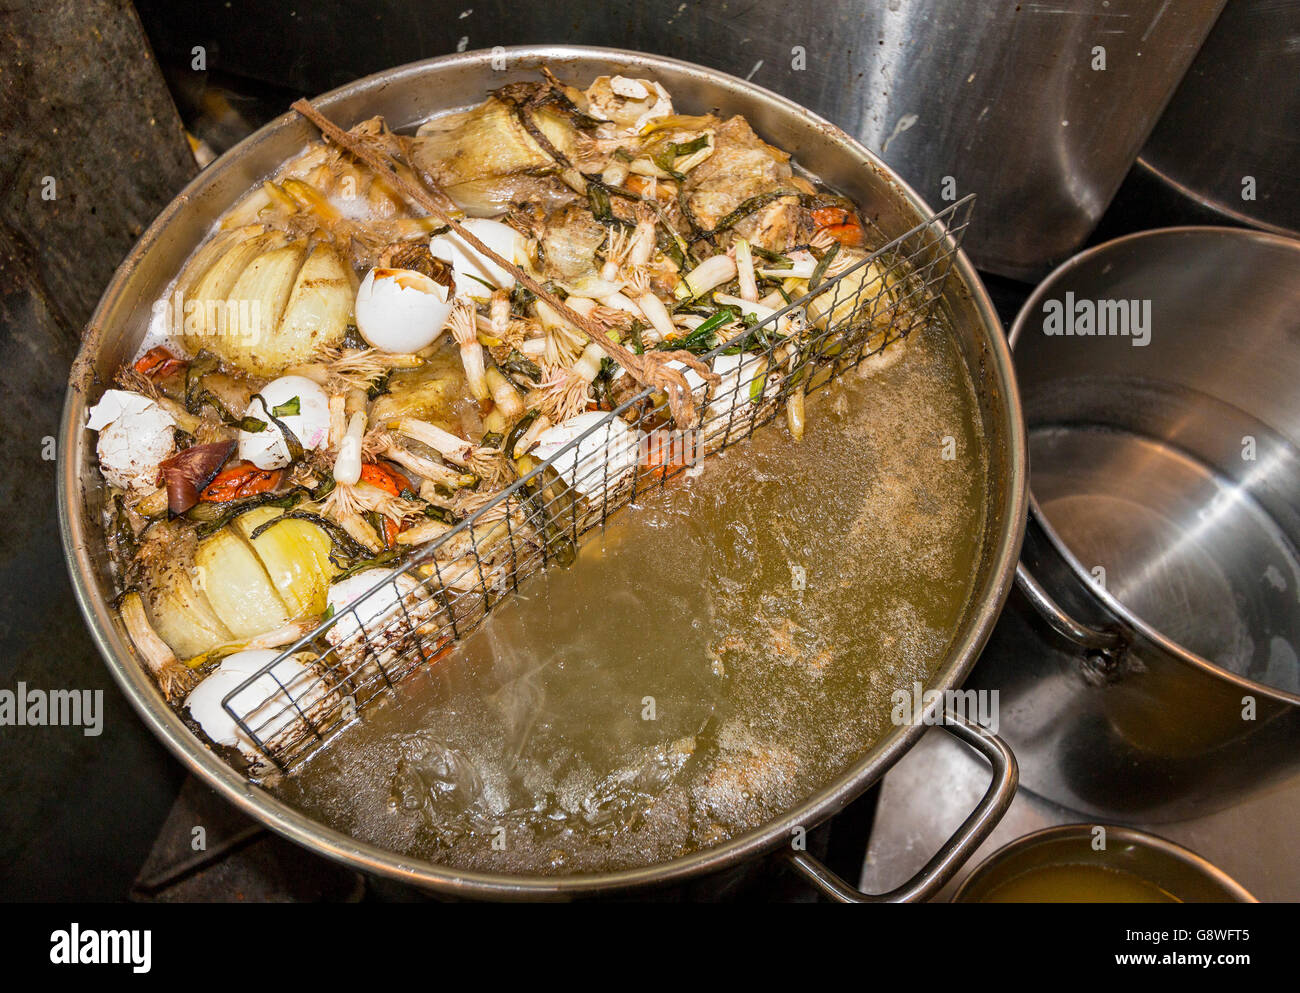 Chef's broth, made from just about anything and here including onions, egg shells, tomatoes, bits of meat. Stock Photo